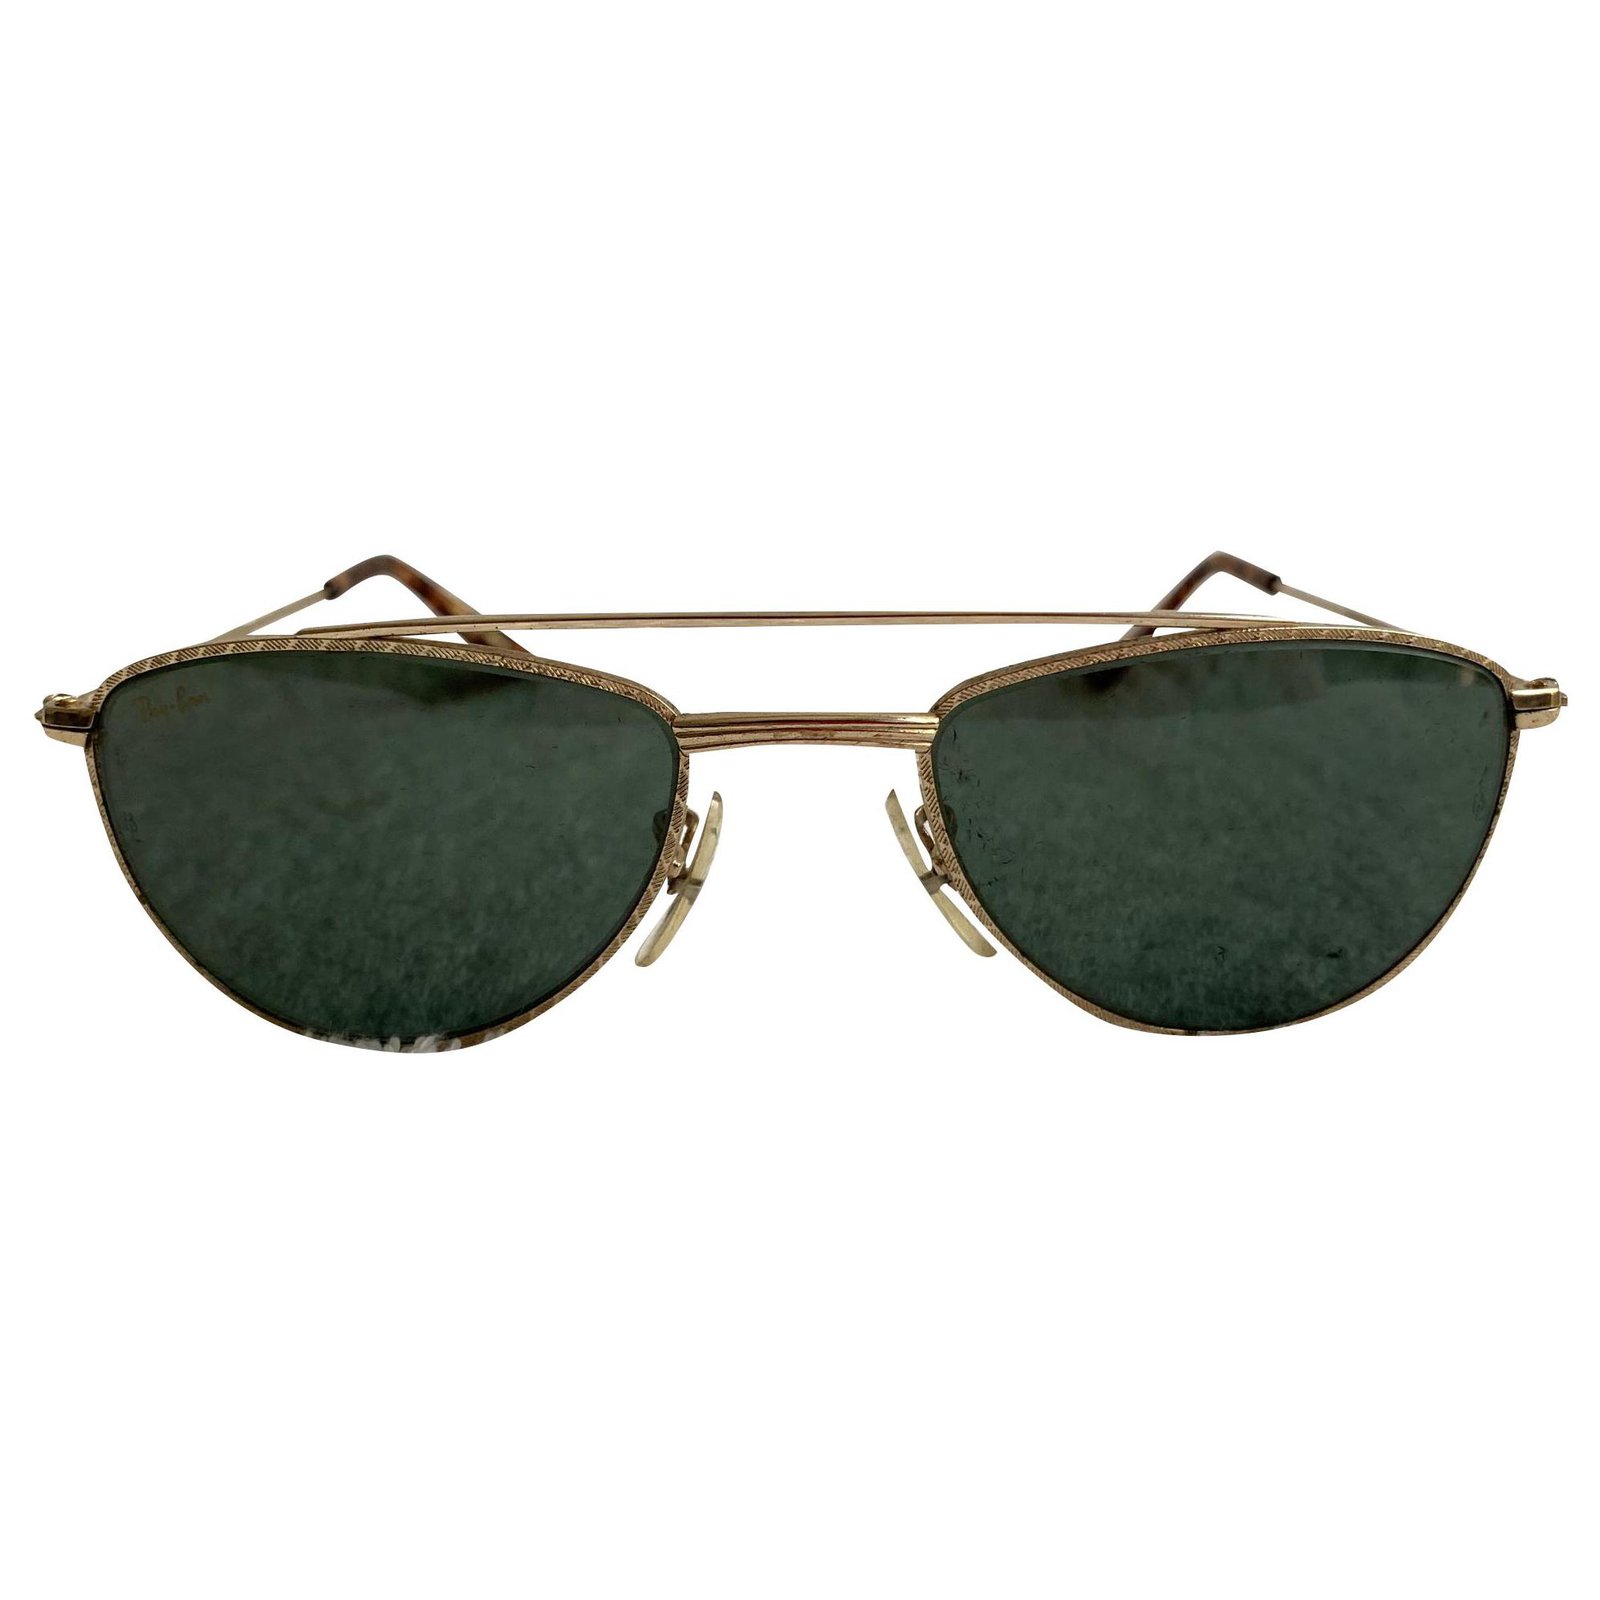 Ray-Ban Vintage small aviator styled 